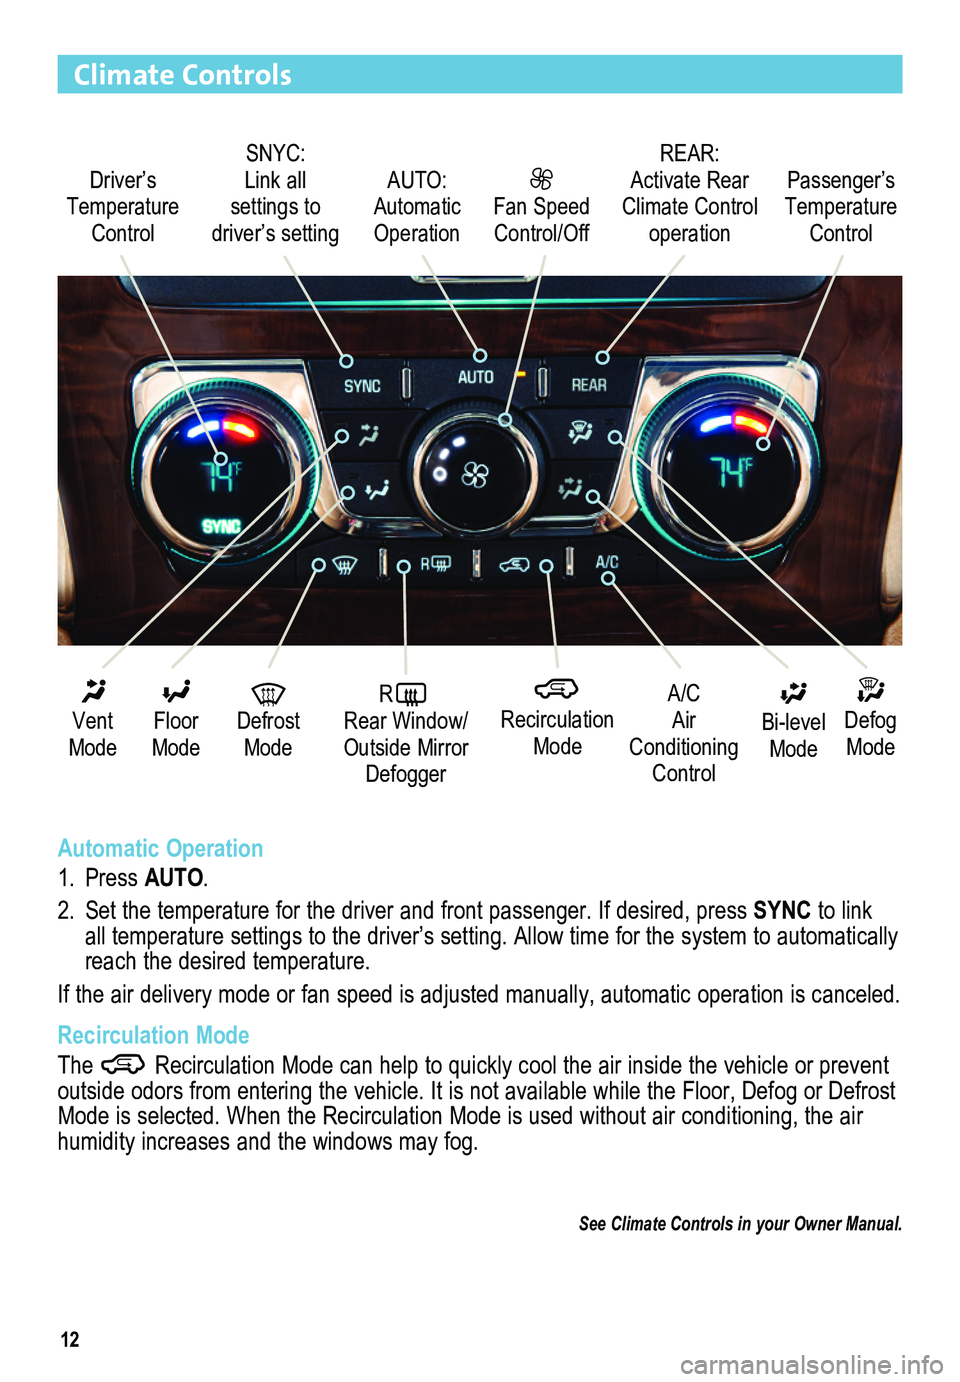 BUICK ENCLAVE 2014  Get To Know Guide 12
Climate Controls
Automatic Operation
1. Press AUTO.
2. Set the temperature for the driver and front passenger. If desired, pres\
s SYNC to link all temperature settings to the driver’s setting. A